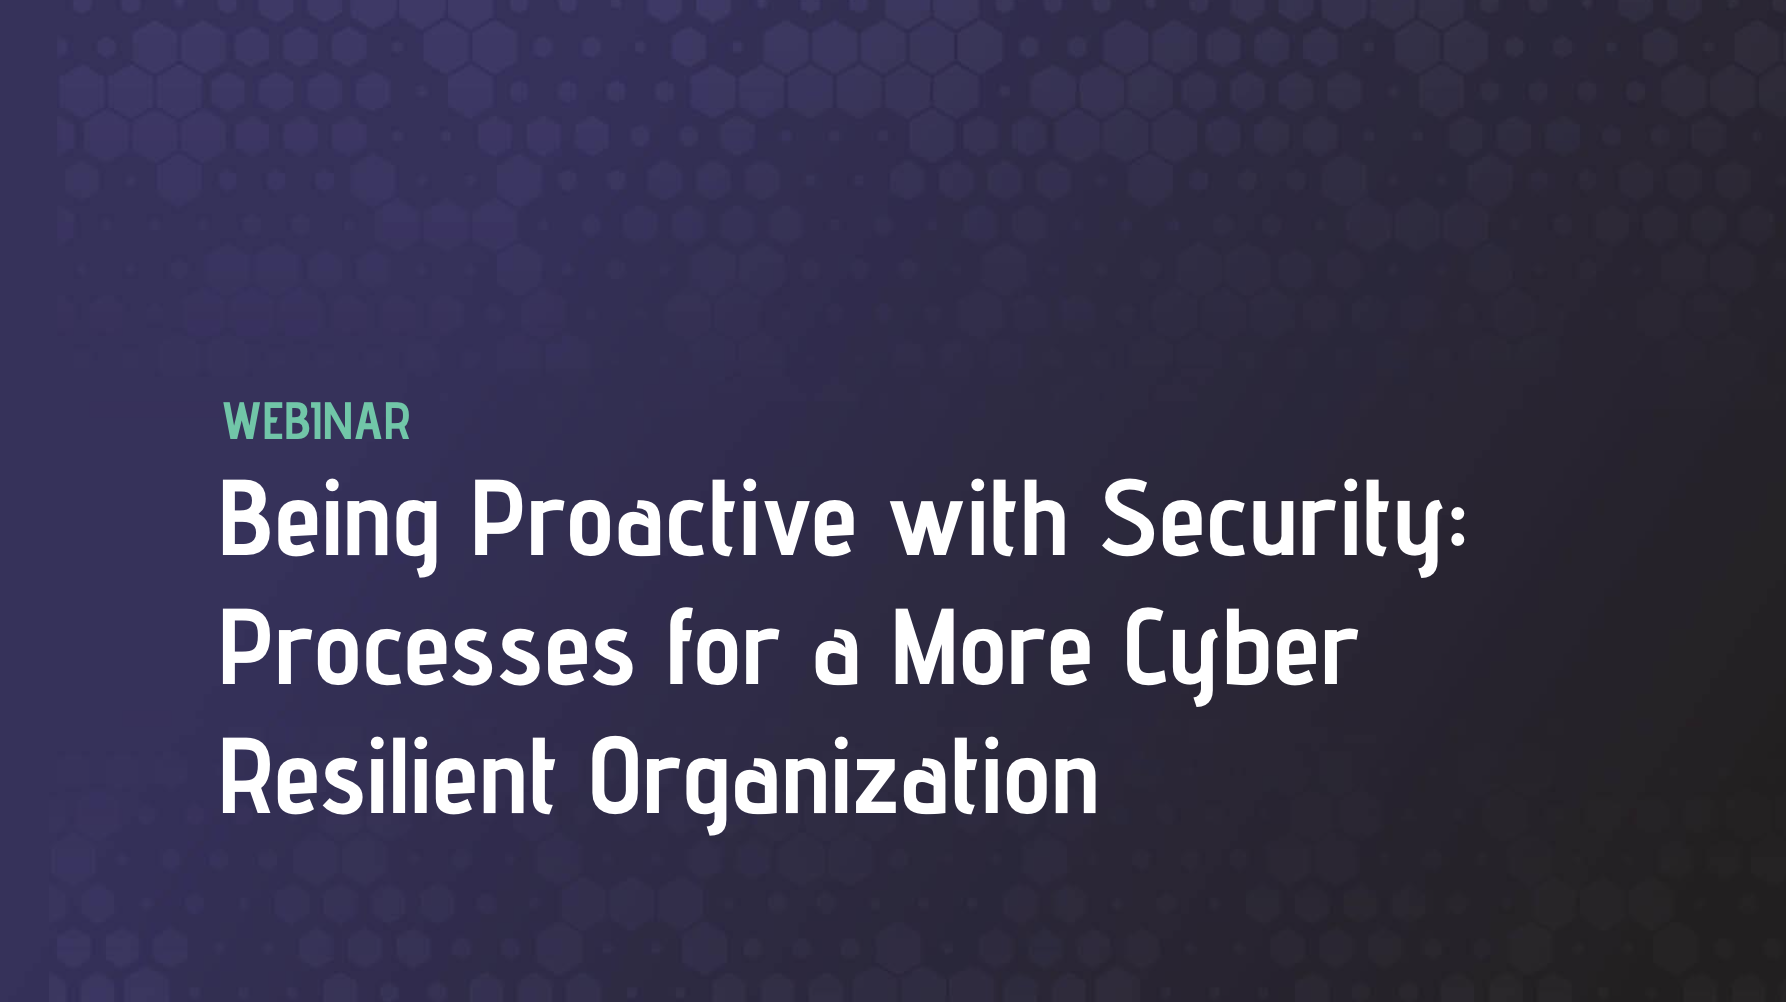 Being Proactive with Security: Processes for a More Cyber Resilient Organization